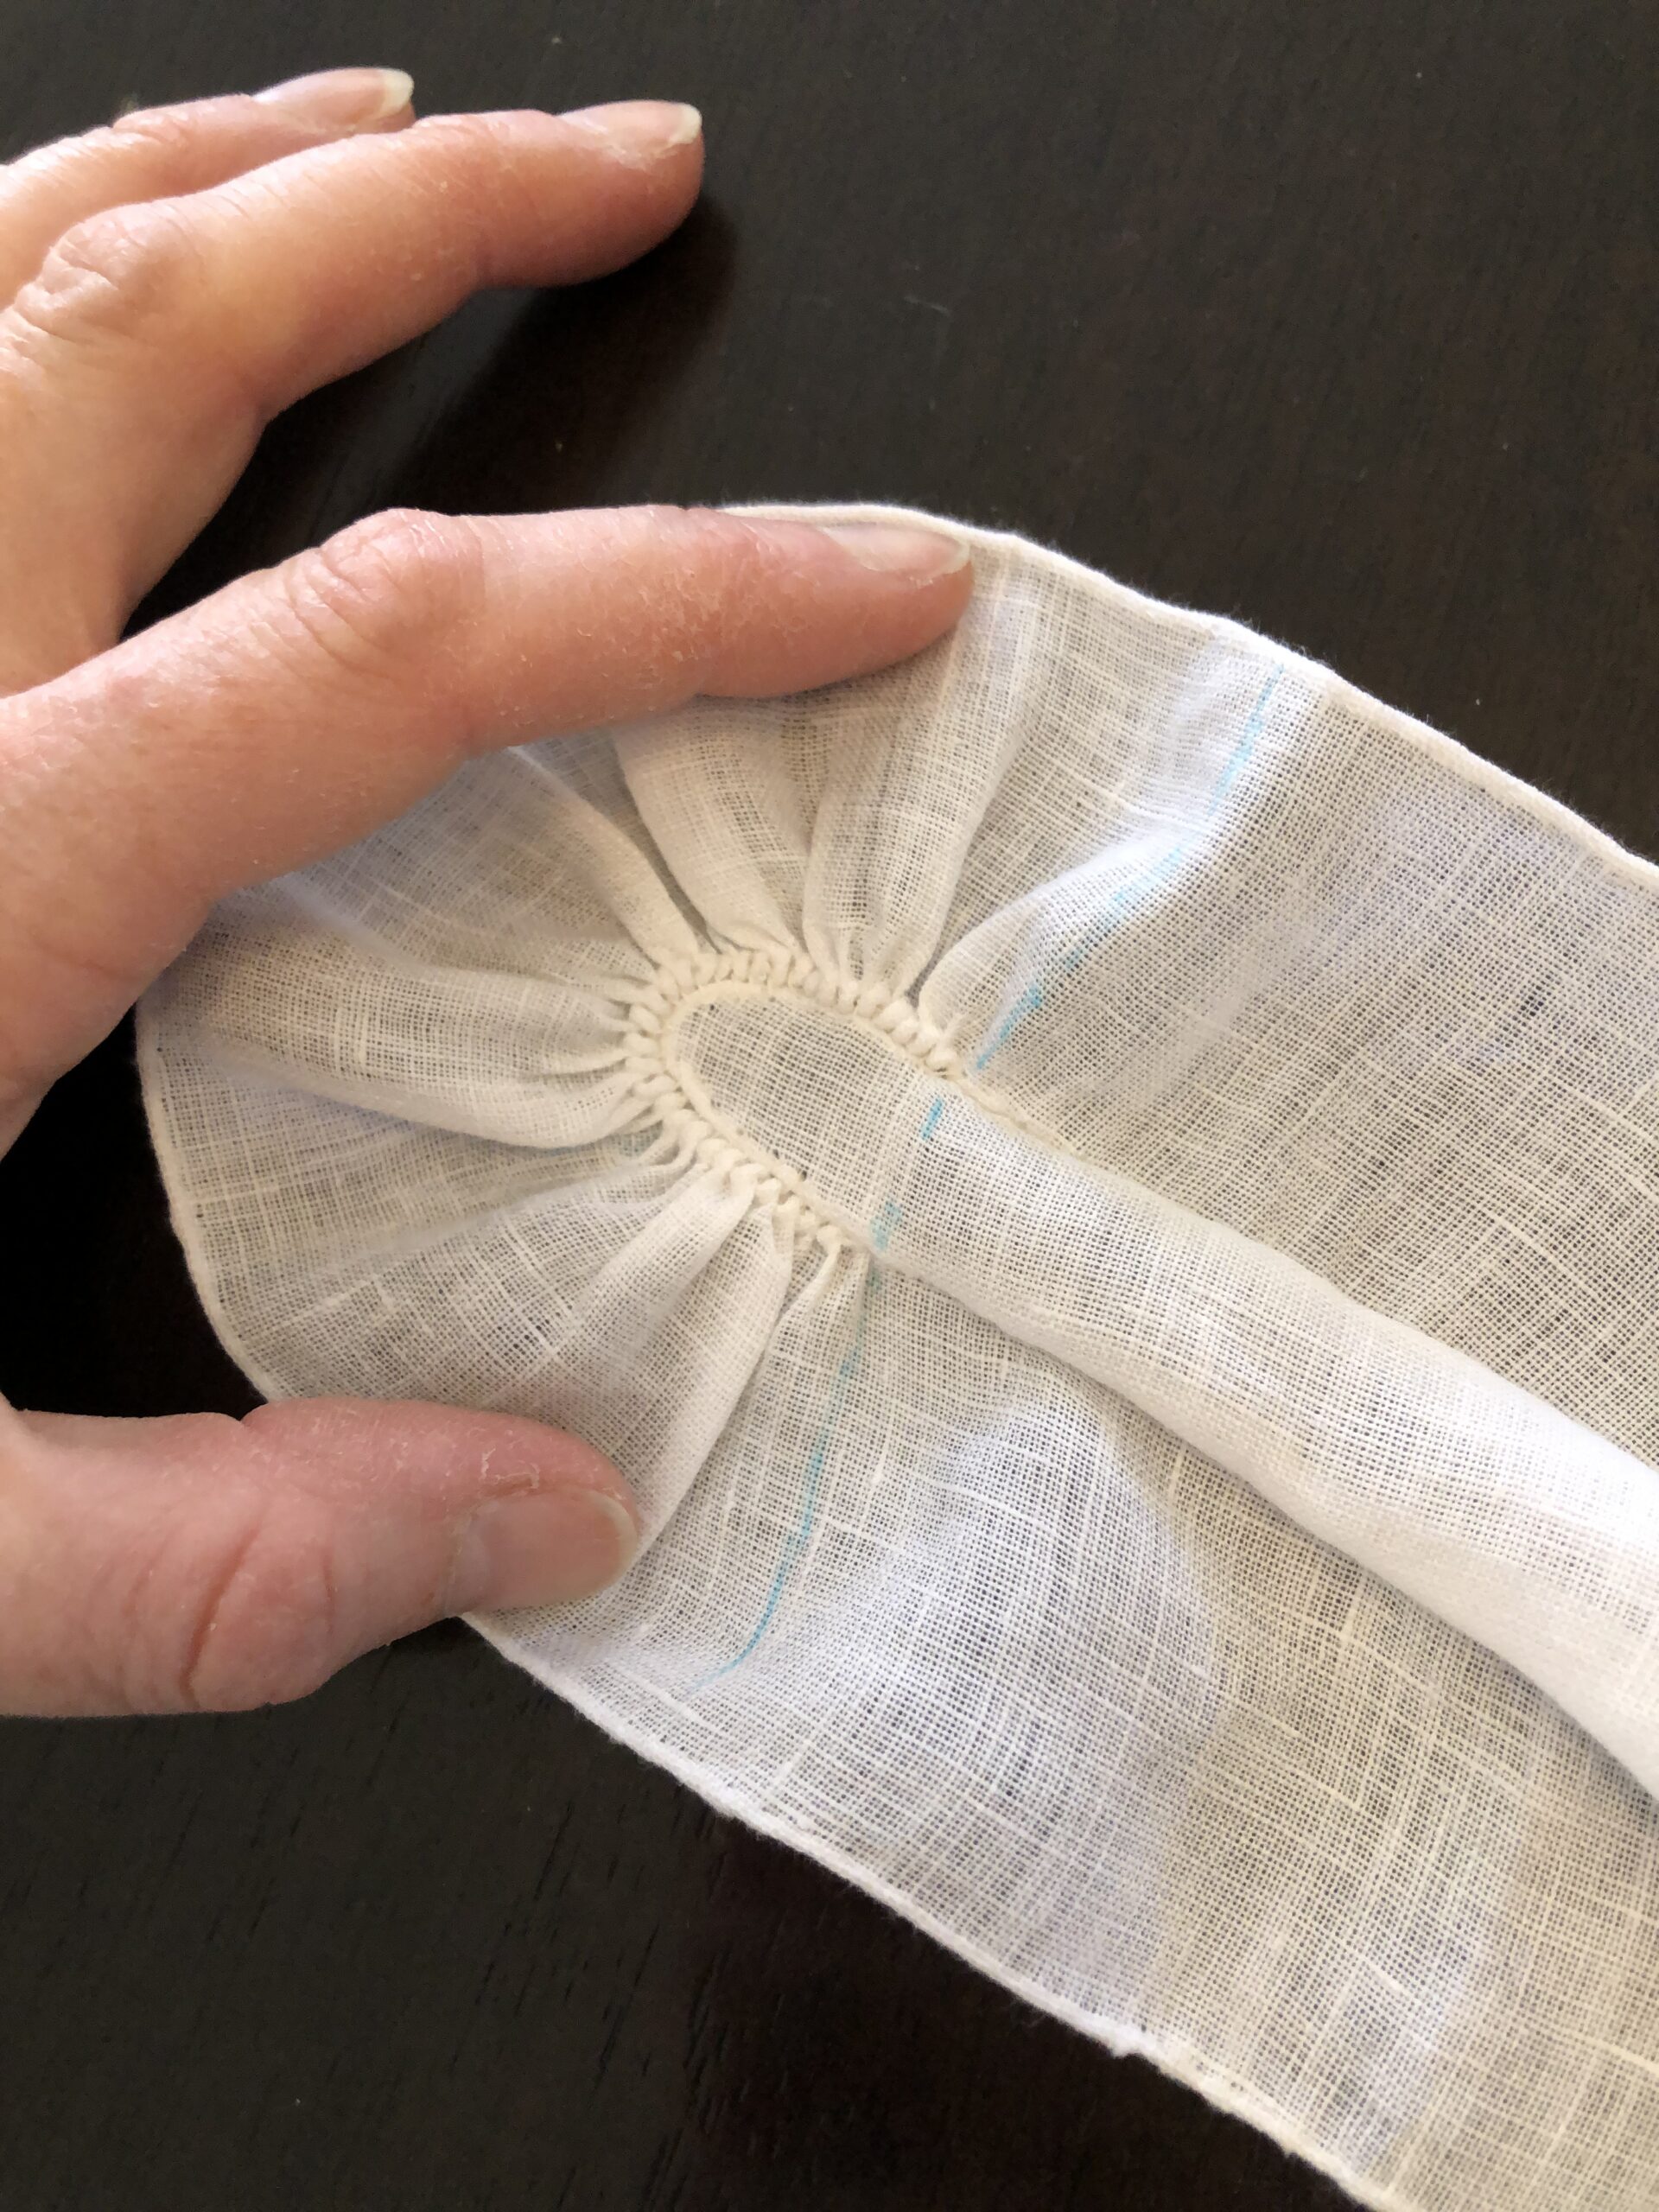 A hand spreads out a tightly gathered ruffle that wraps around a point of fabric.